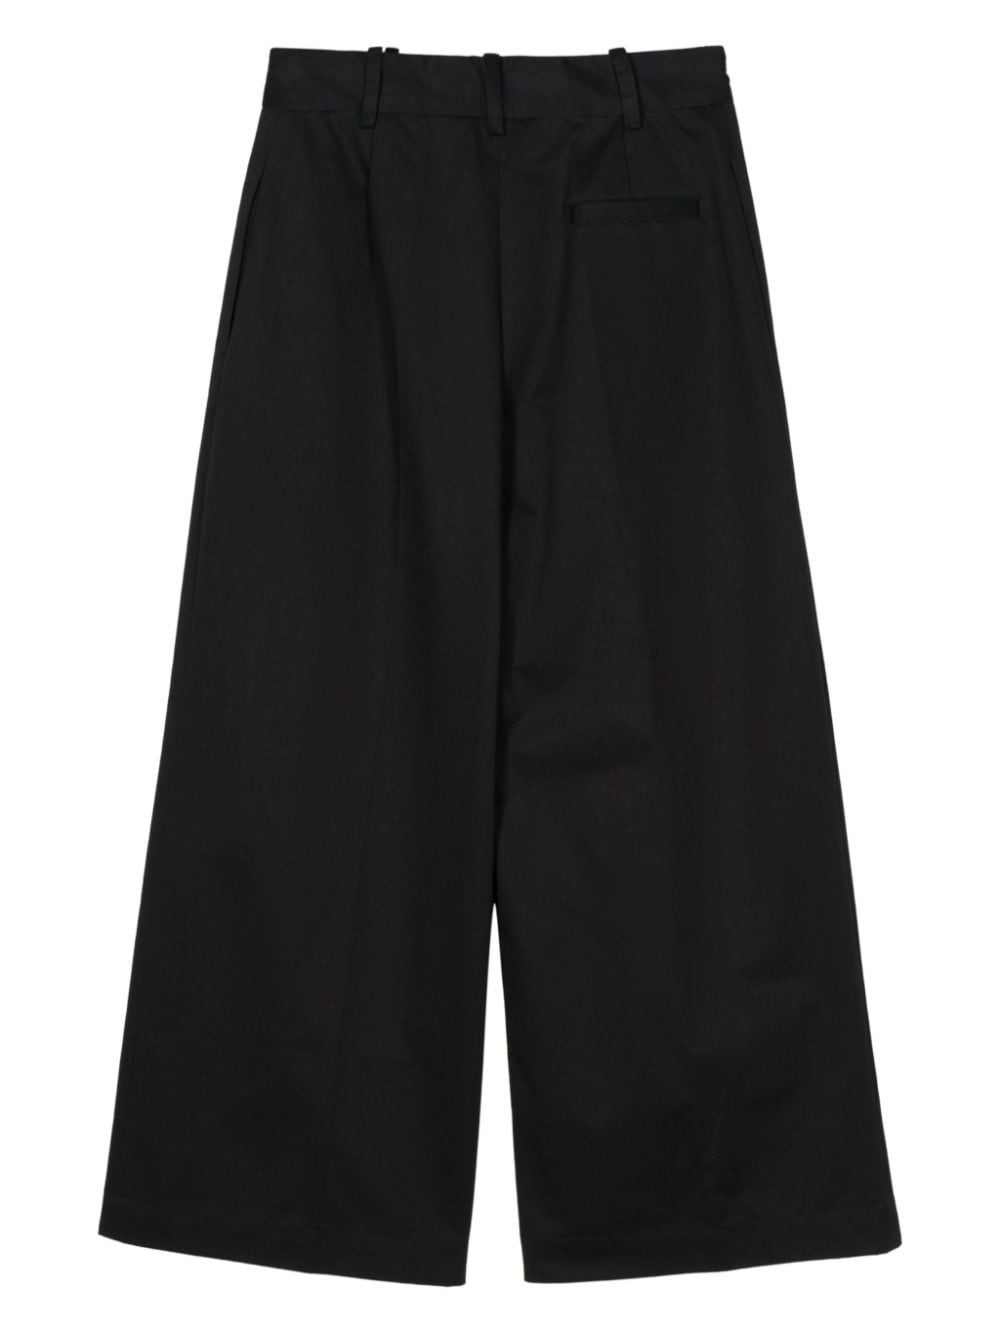 Semicouture Trousers Black